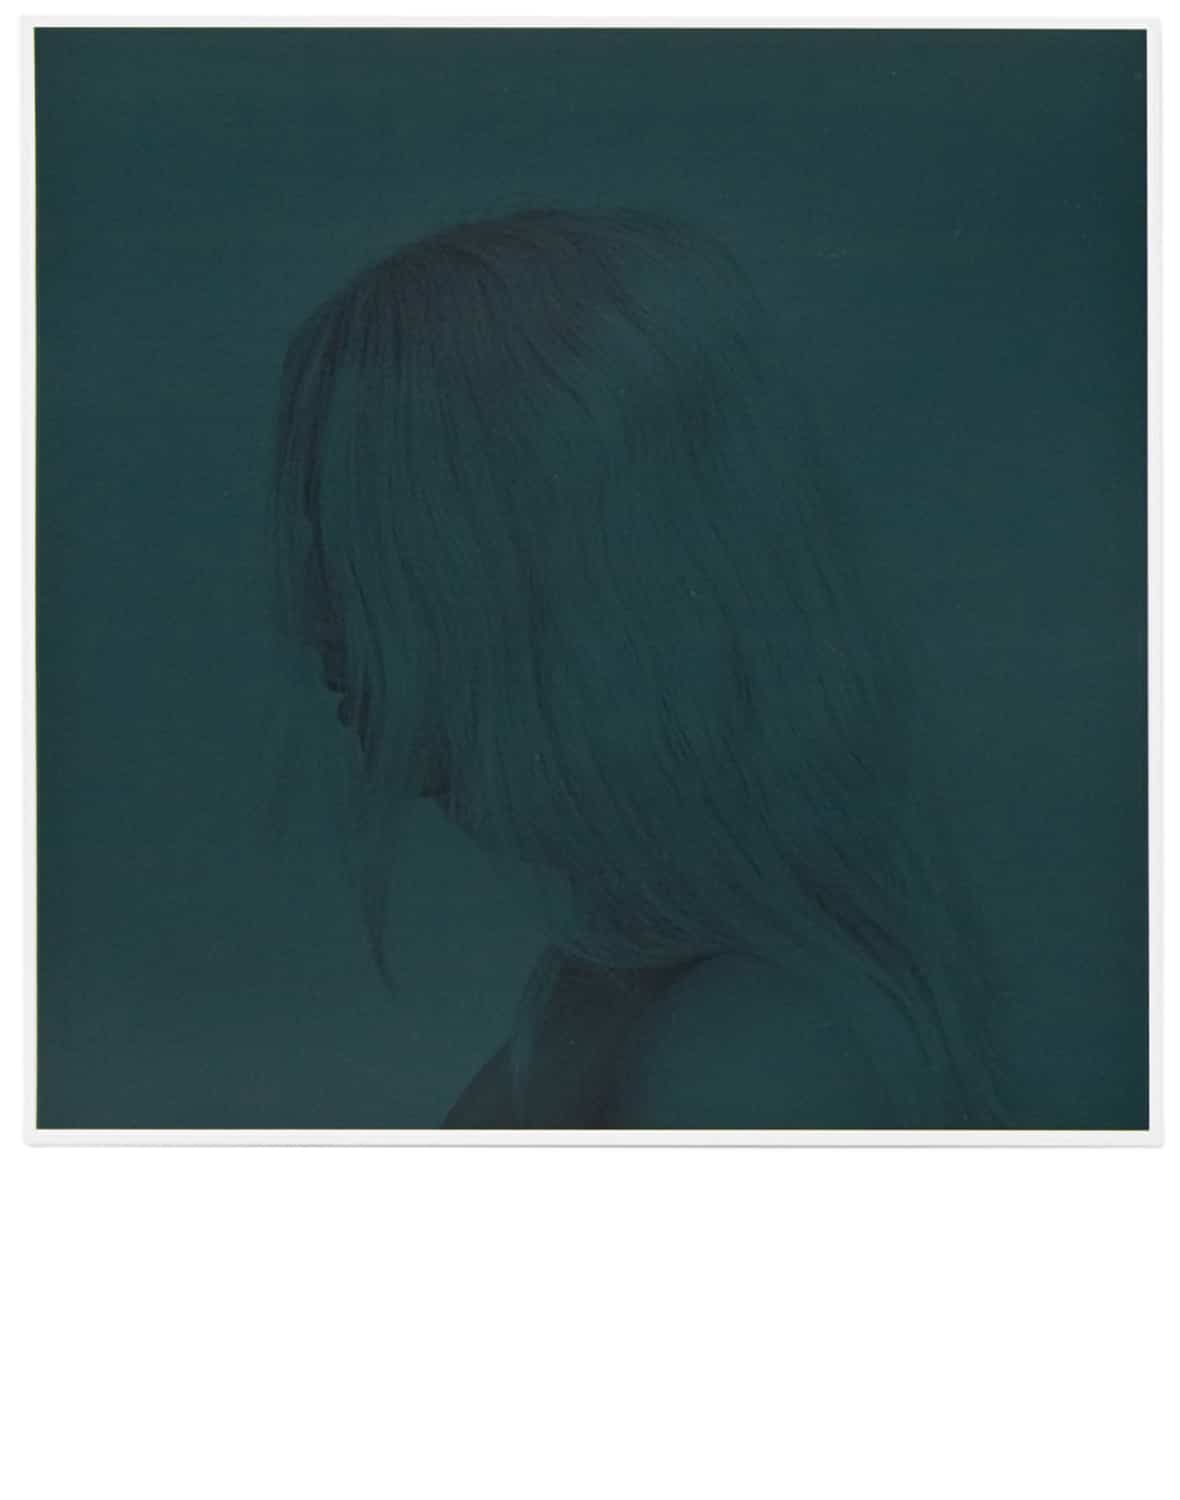 Monochrome portraits by Trine Søndergaard. Original photographic print with special edition book